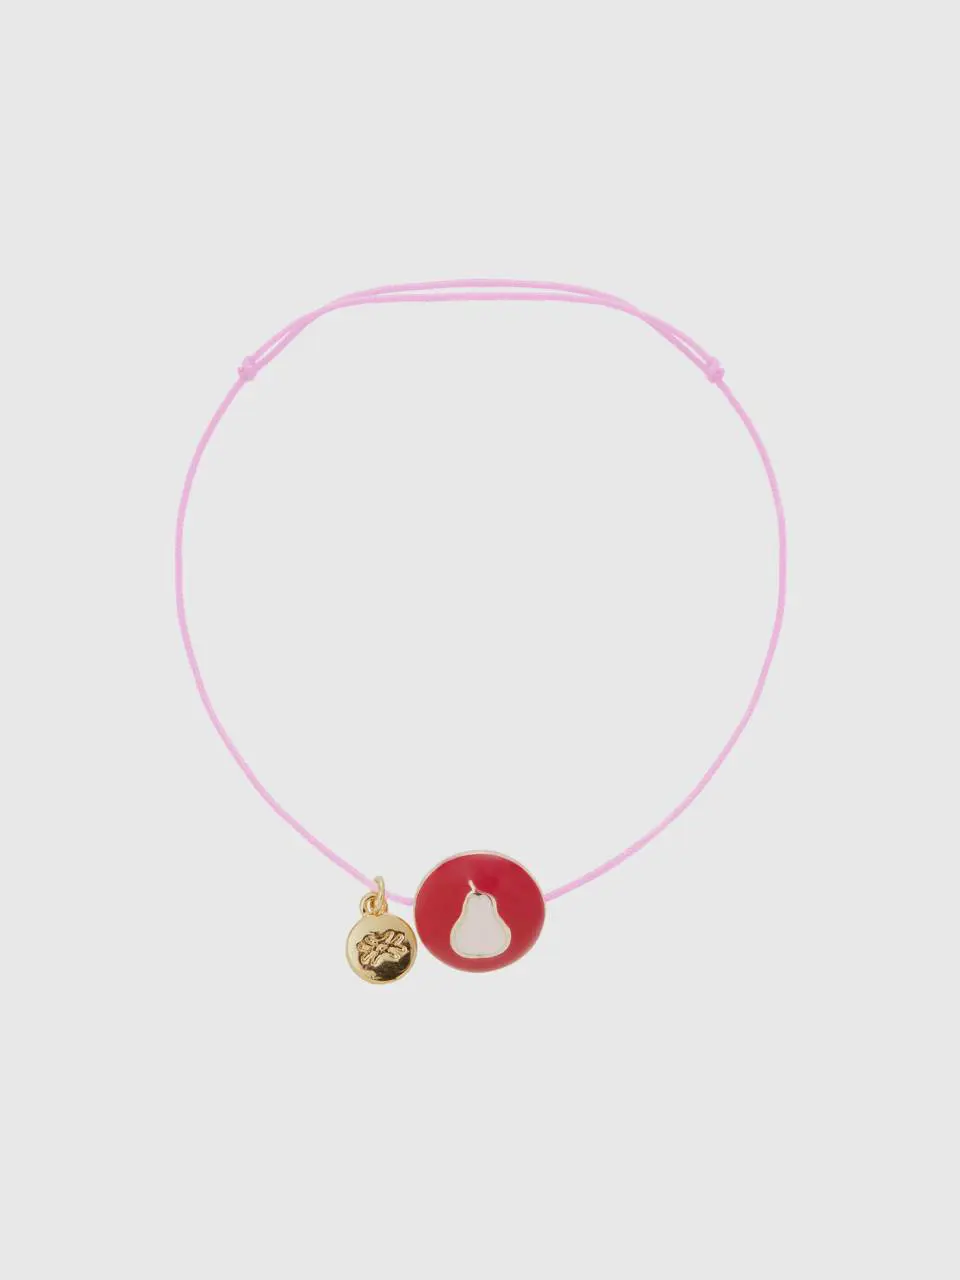 Benetton red bracelet with pear pendant. 1